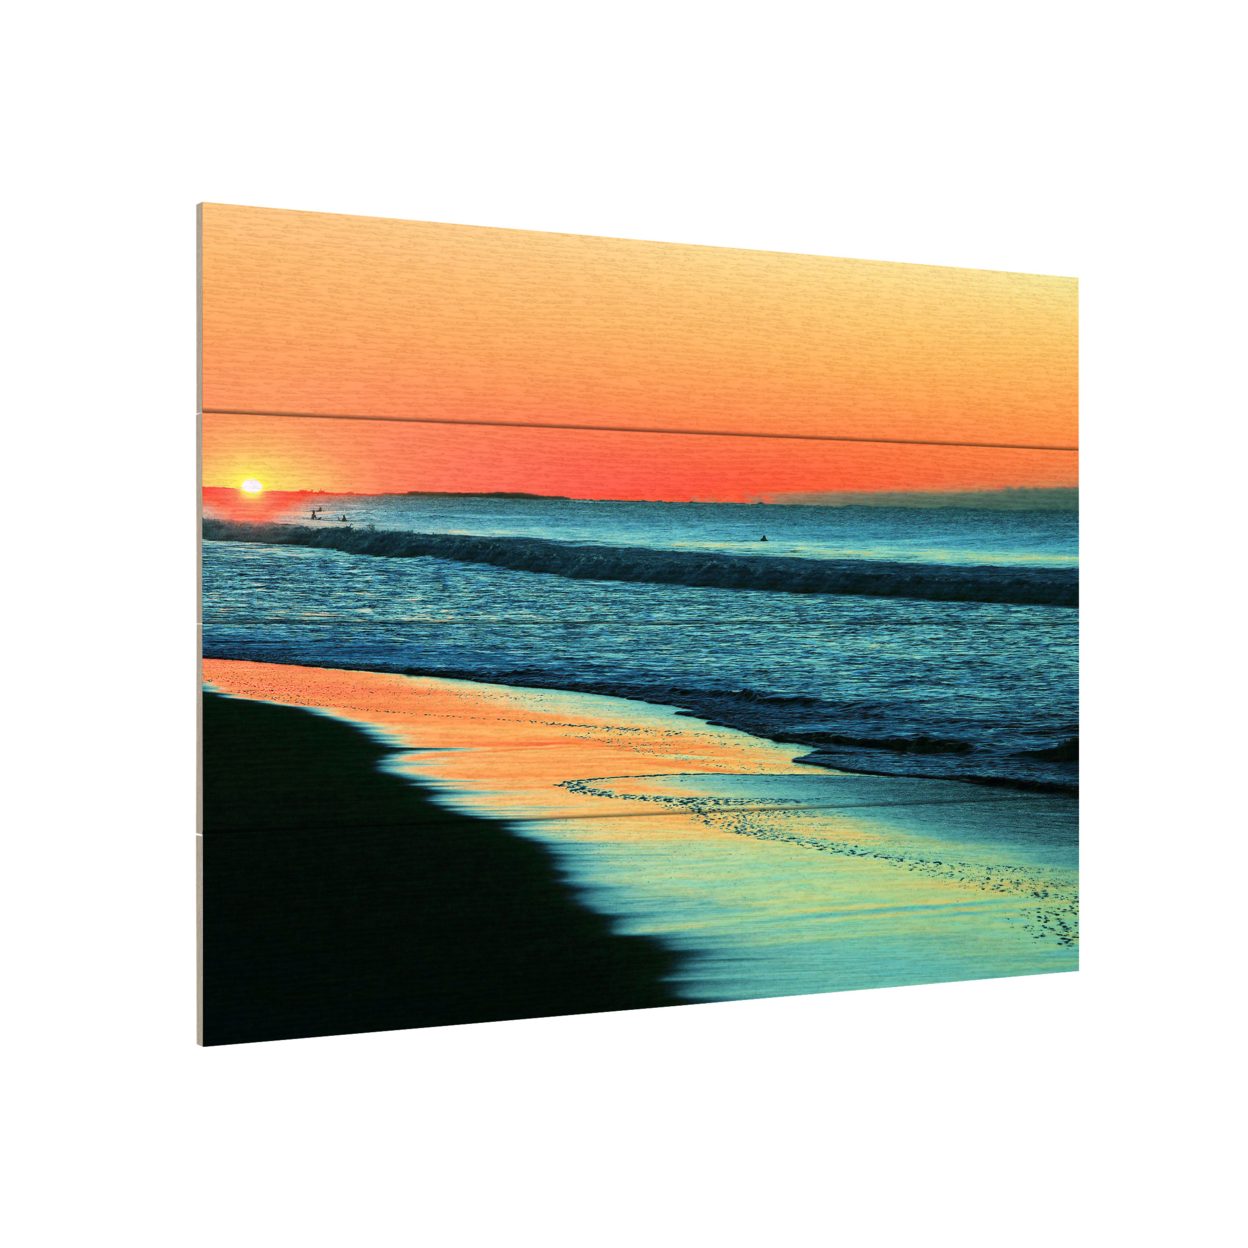 Wall Art 12 X 16 Inches Titled Good Morning Sunshine Ready To Hang Printed On Wooden Planks